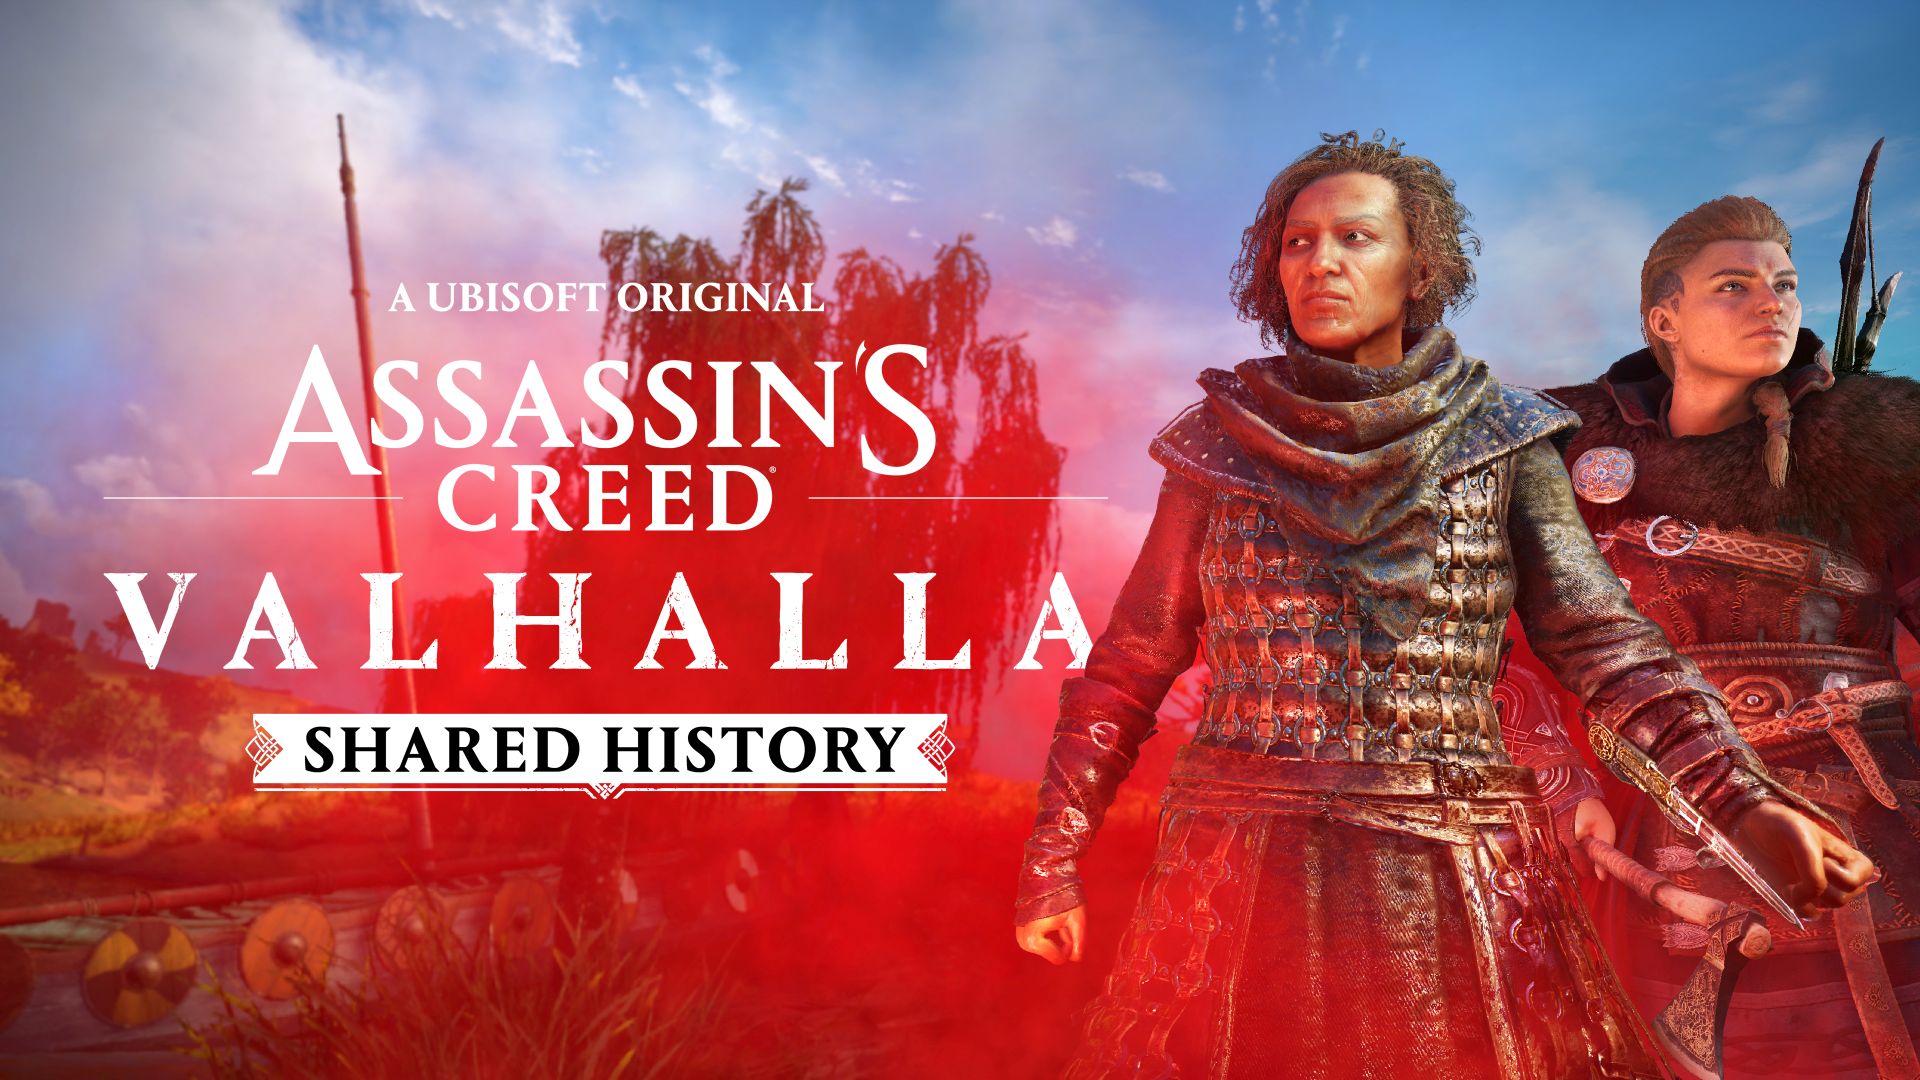 Assassin's Creed Valhalla Shared History Quest key art.